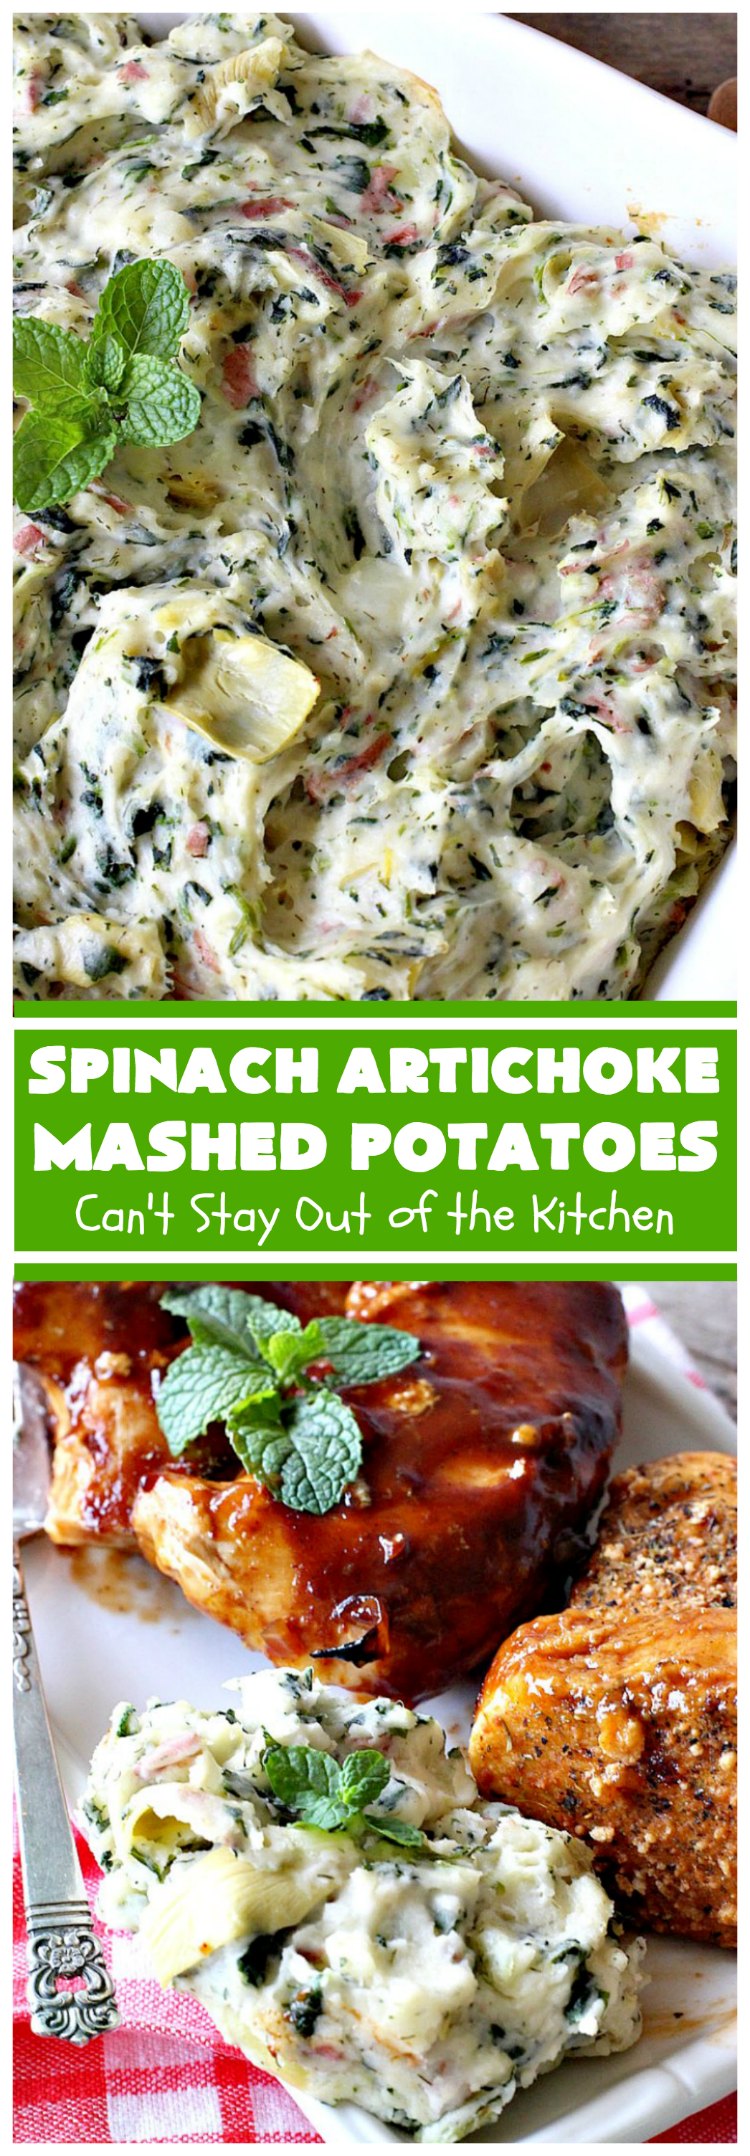 Spinach Artichoke Mashed Potatoes | Can't Stay Out of the Kitchen